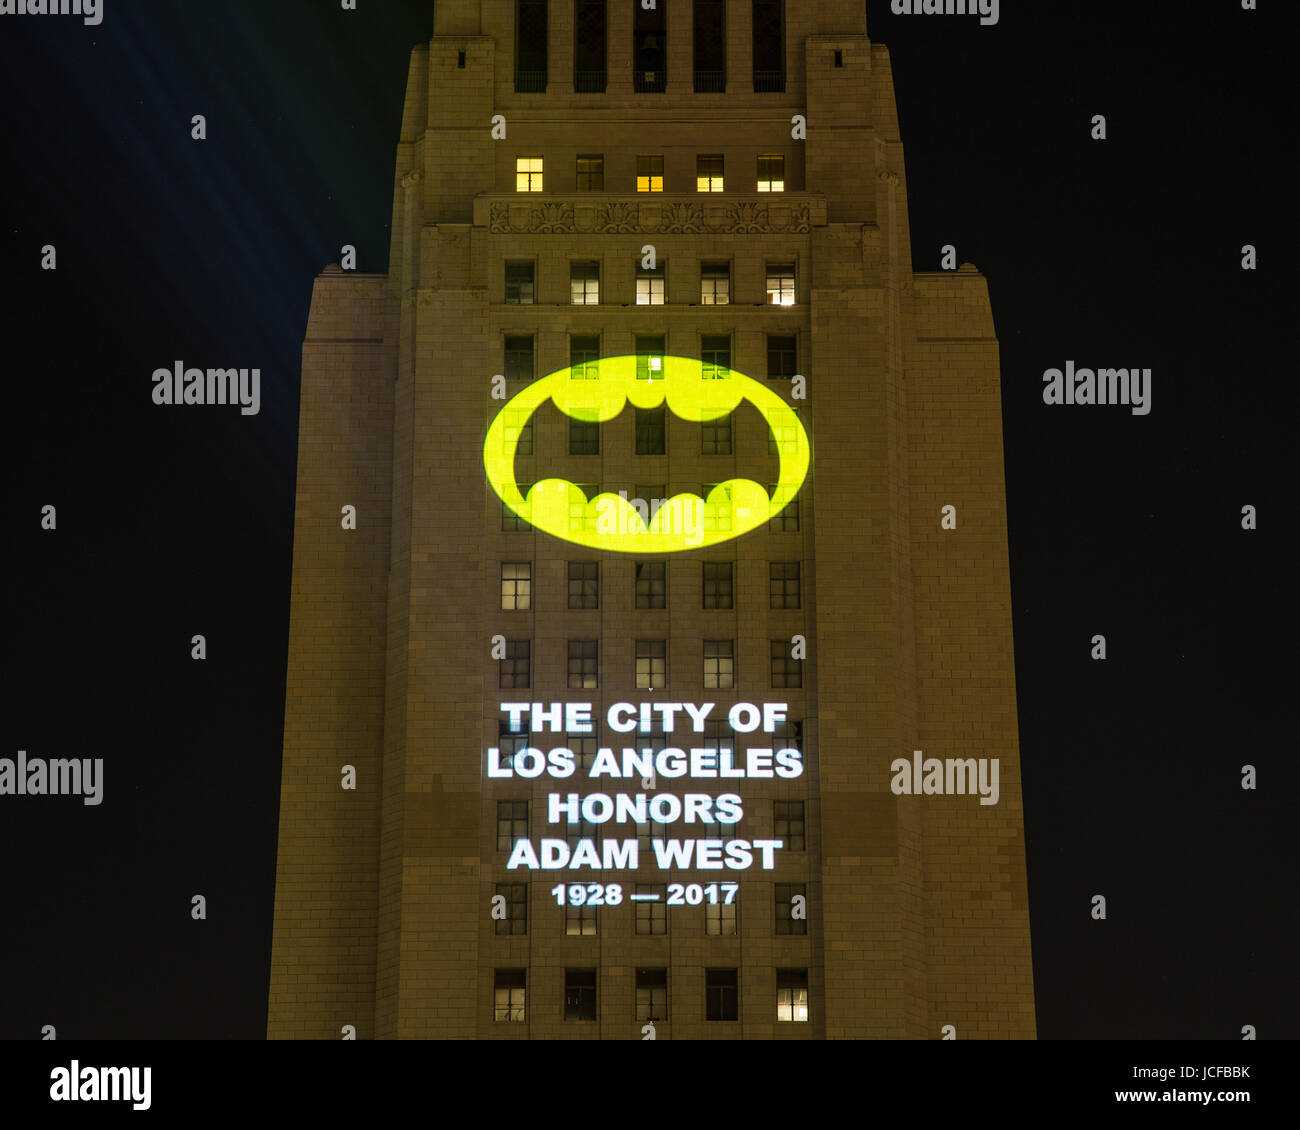 Los Angeles, California, USA. 15th June, 2017.  The City of Los Angeles honored the late actor Adam West, best known for his role as Batman, with a ceremonlal lighting of the Bat-Signal projected on City Hall in downtown Los Angeles on June 15th, 2017.  The Bat-Signal is an  iconic symbol of the Batman character and consists of a yellow oval light with a bat silhouette in the middle.  Credit:  Sheri Determan/Alamy Live News Stock Photo